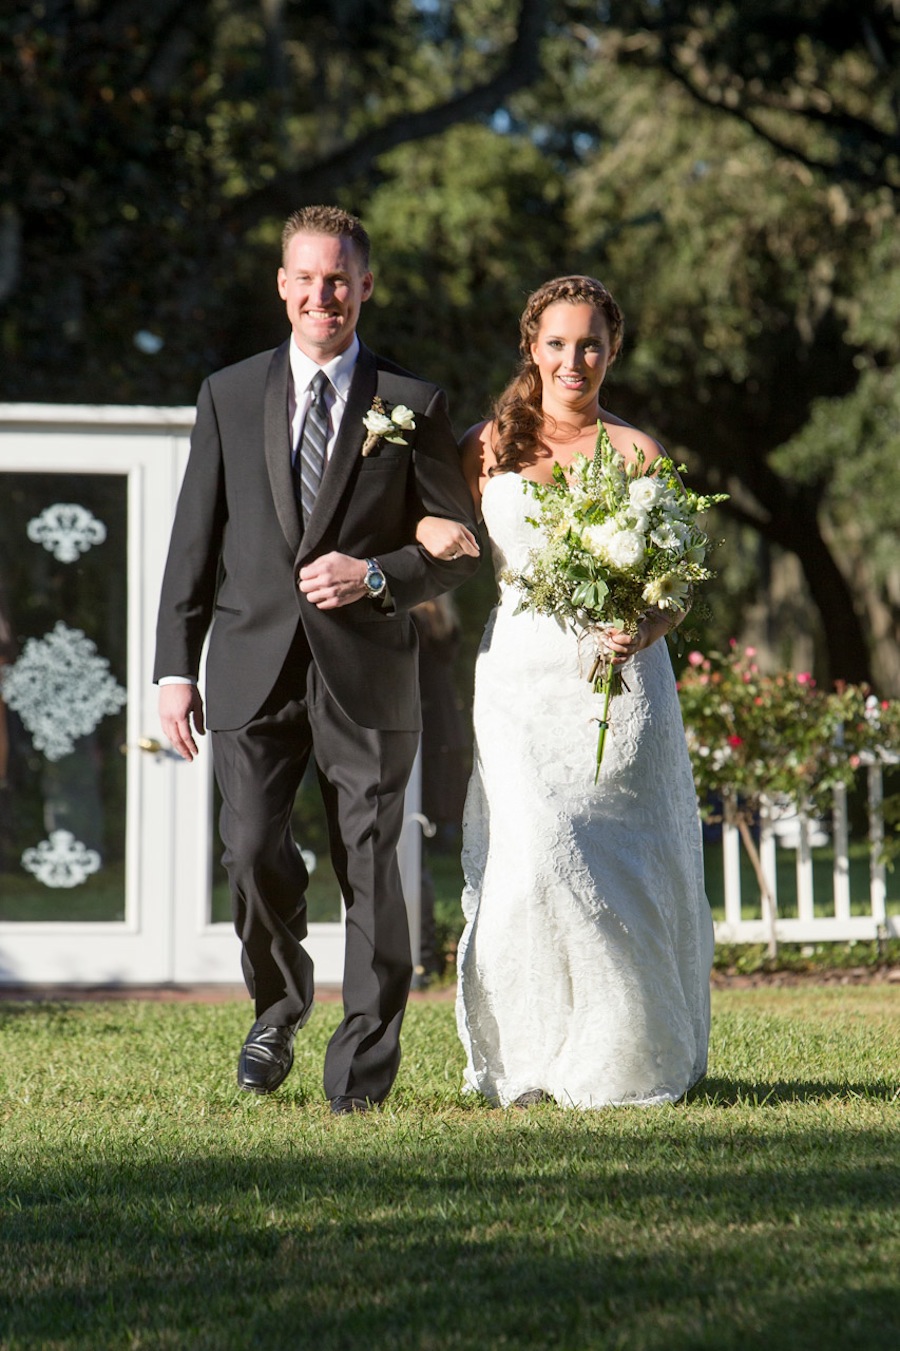 Father of the bride duties: What you need to know | Easy Weddings